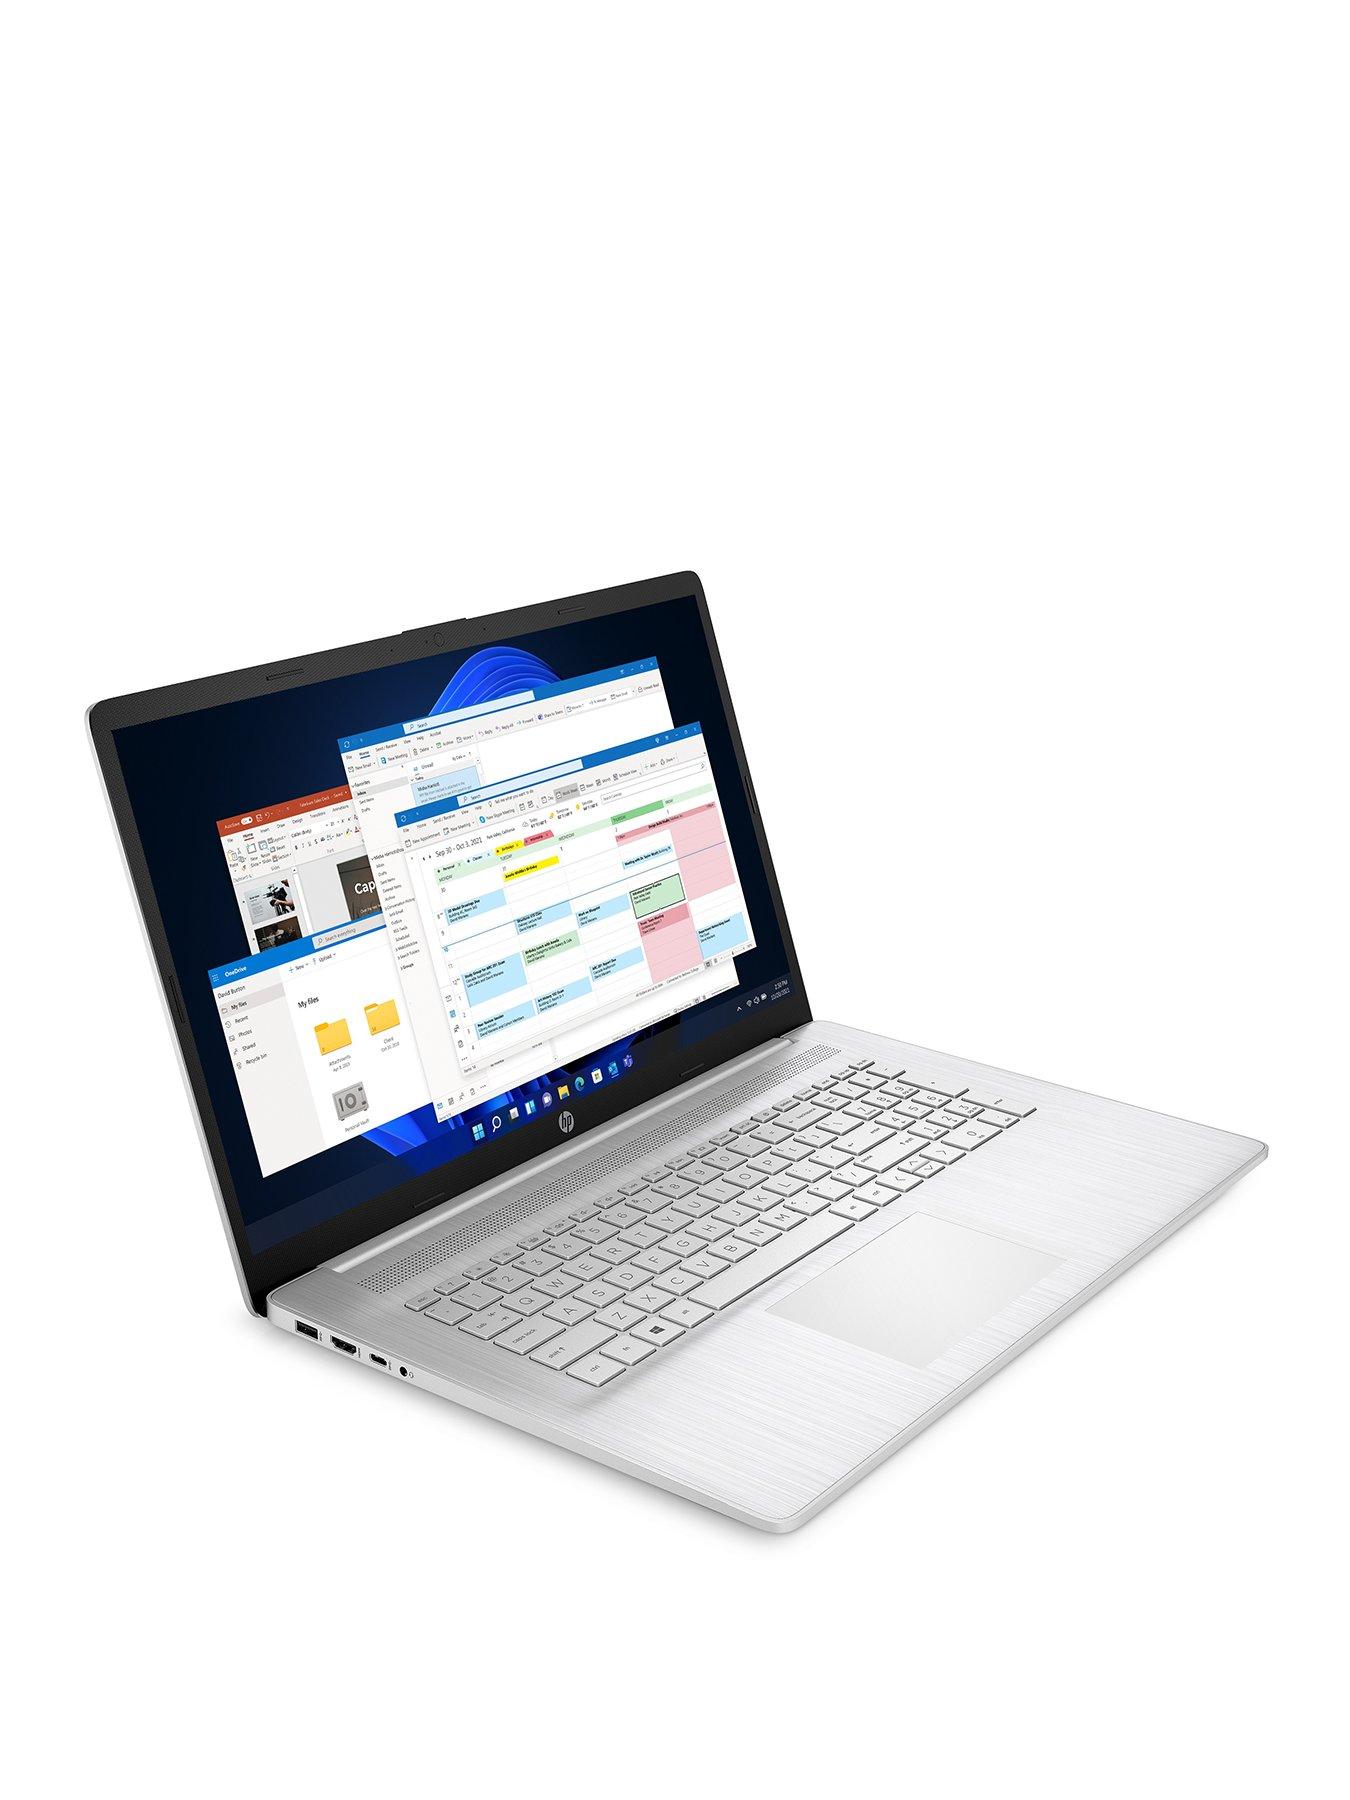 Gepard stamtavle Problemer HP 17-cn0009na Laptop - 17.3in FHD, Intel Core i3, 8GB RAM, 256GB Storage -  Silver | very.co.uk